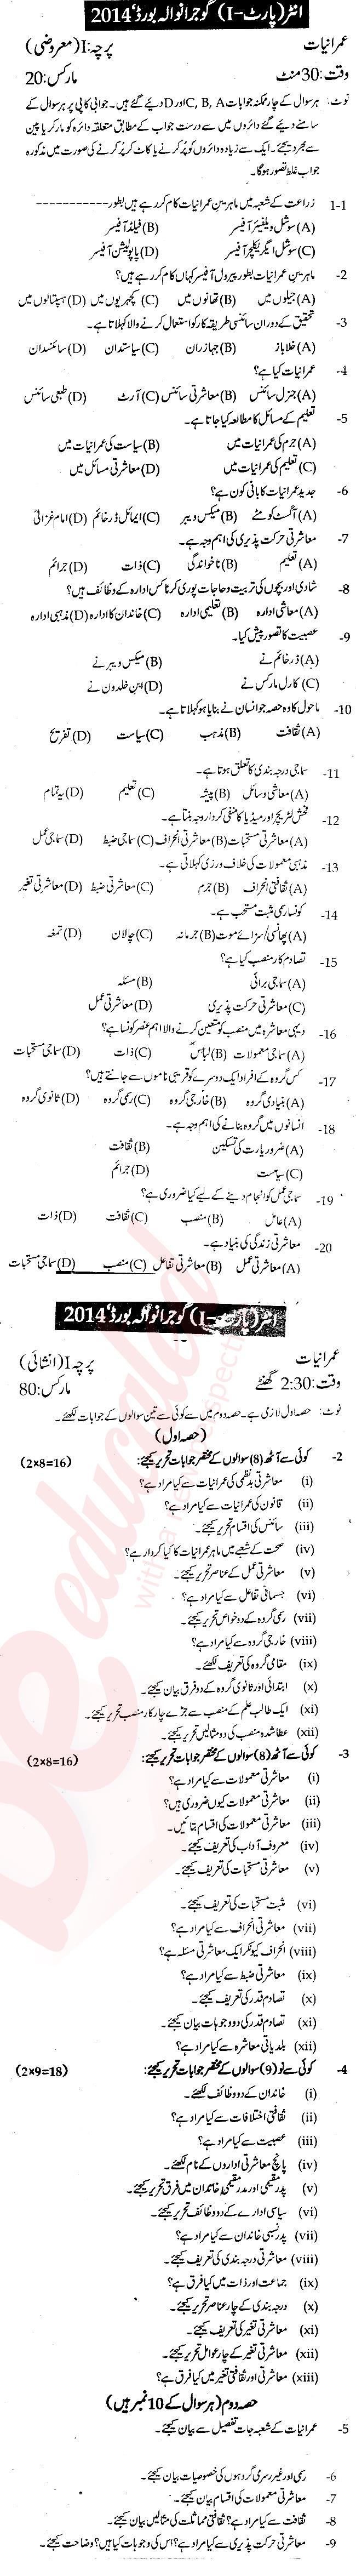 Sociology FA Part 2 Past Paper Group 1 BISE Gujranwala 2014